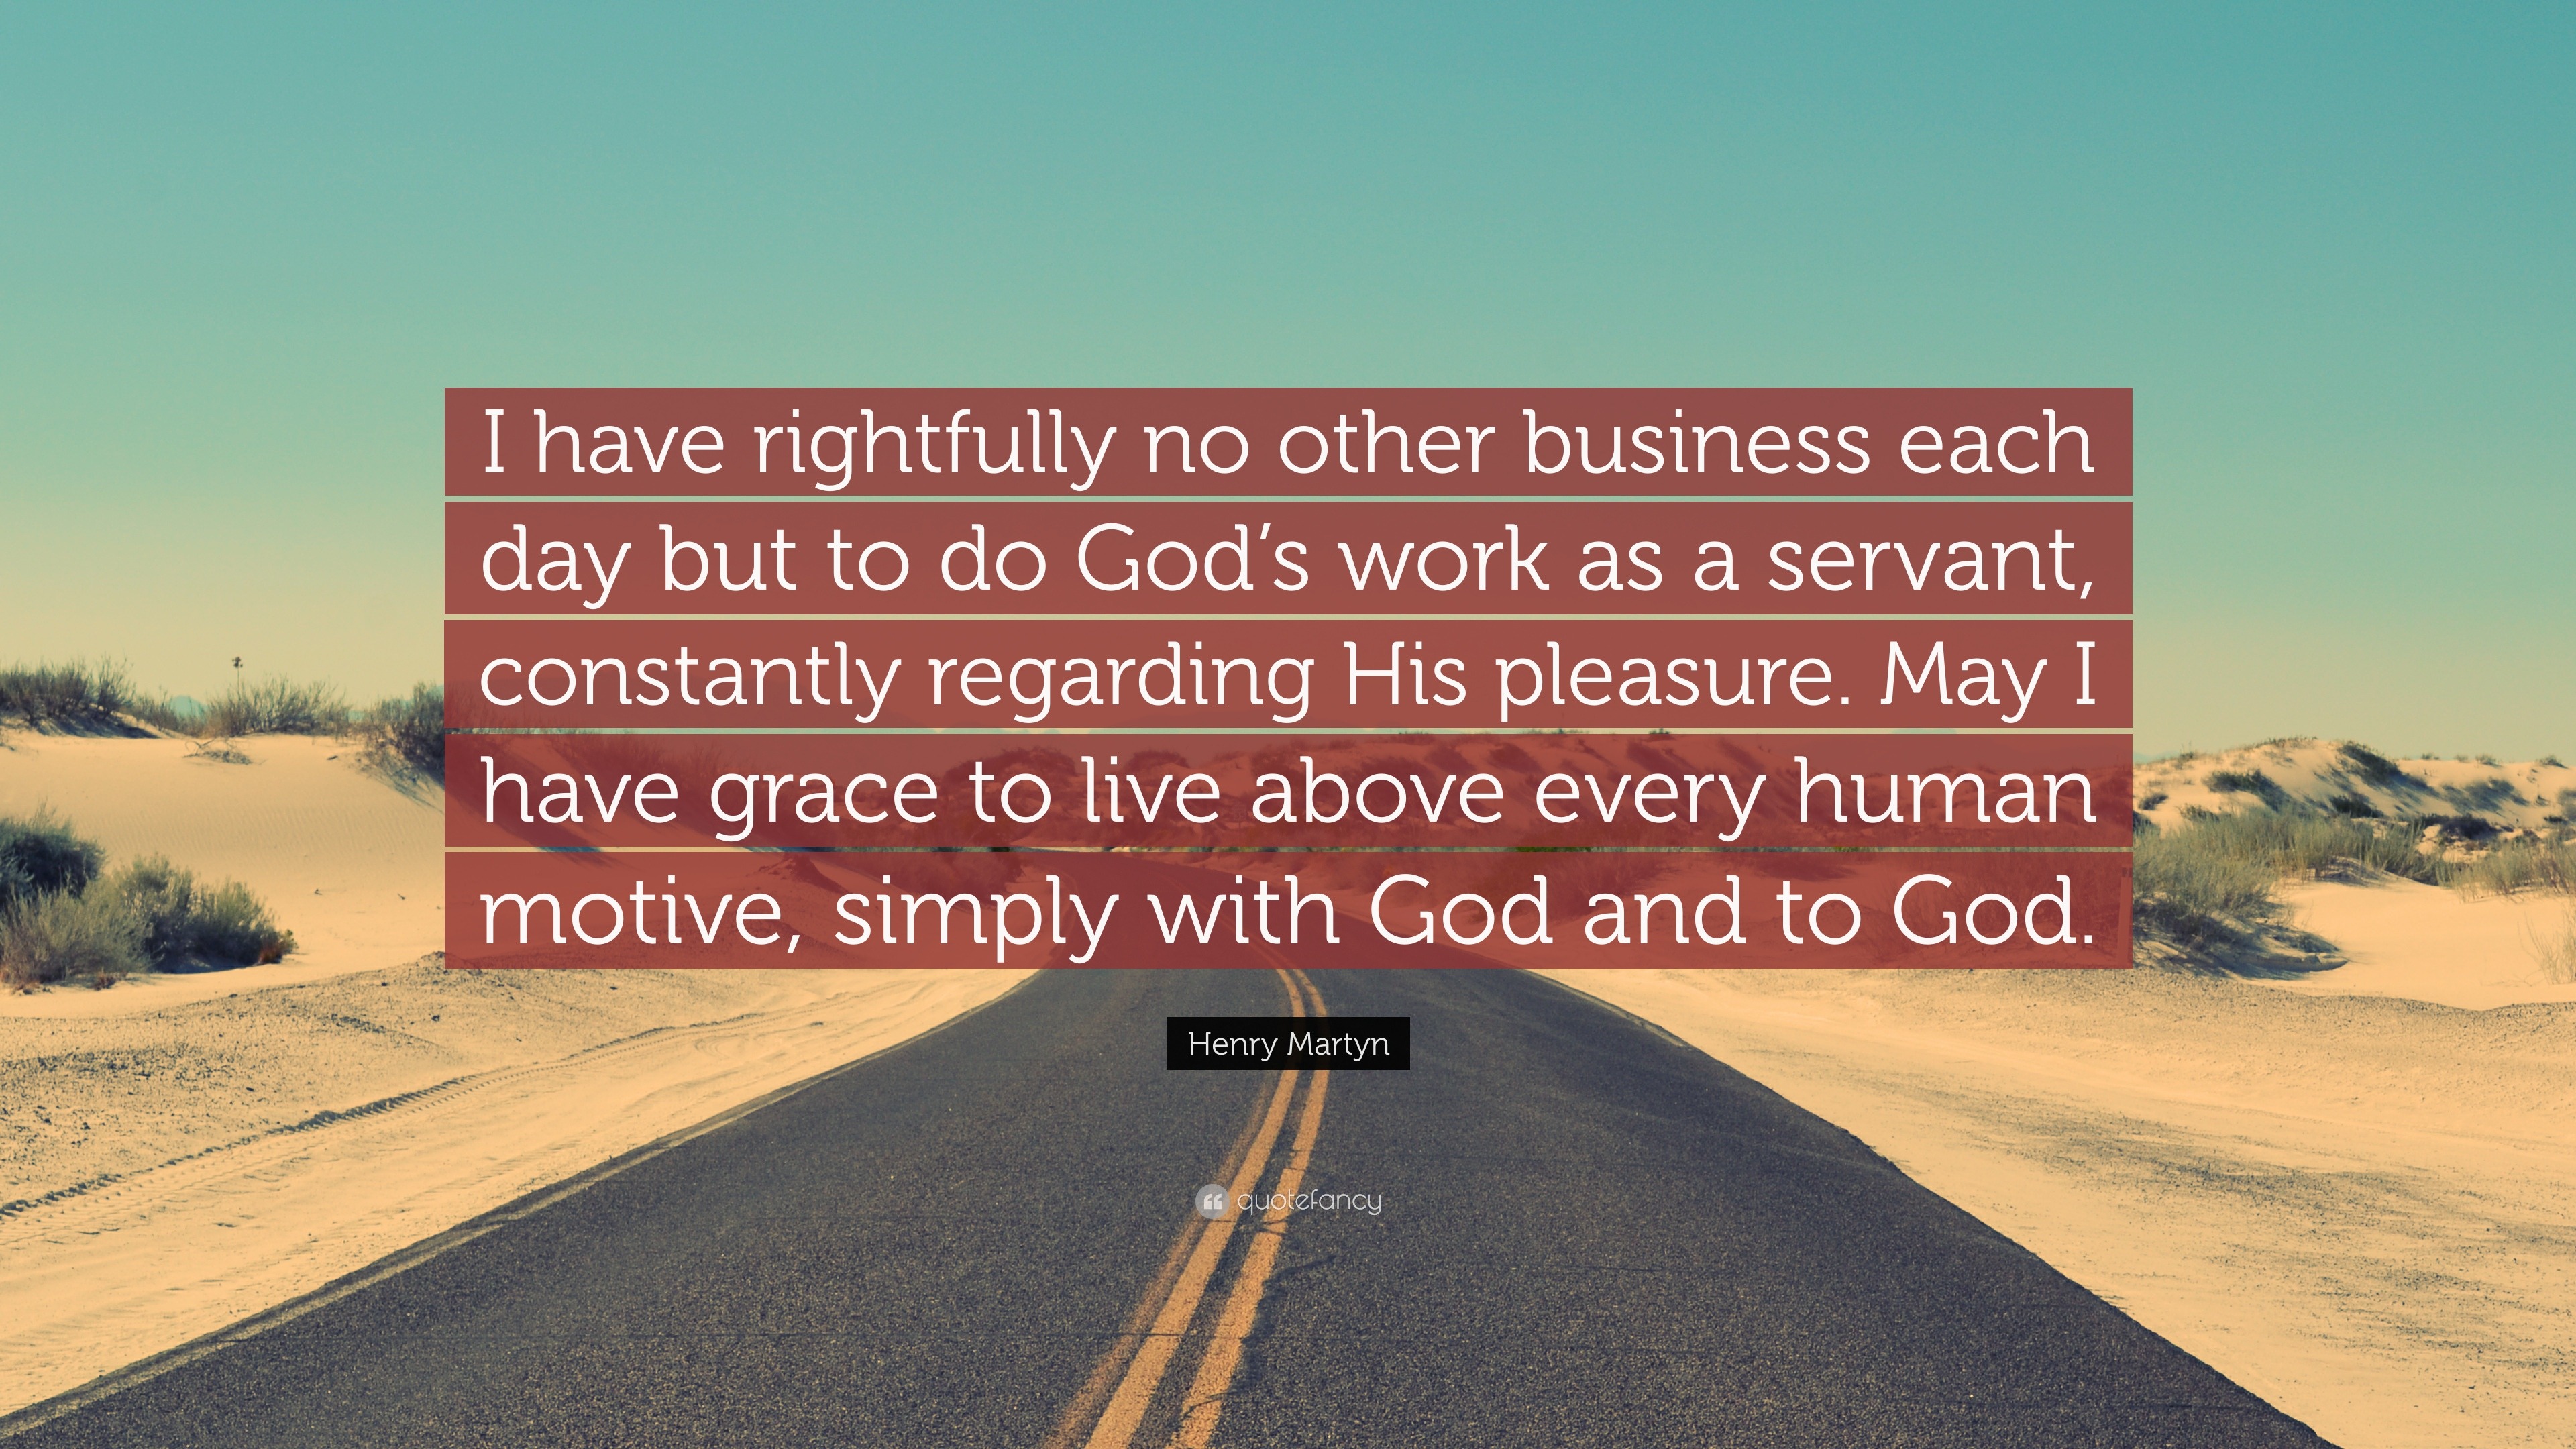 Henry Martyn Quote: “I have rightfully no other business each day but ...